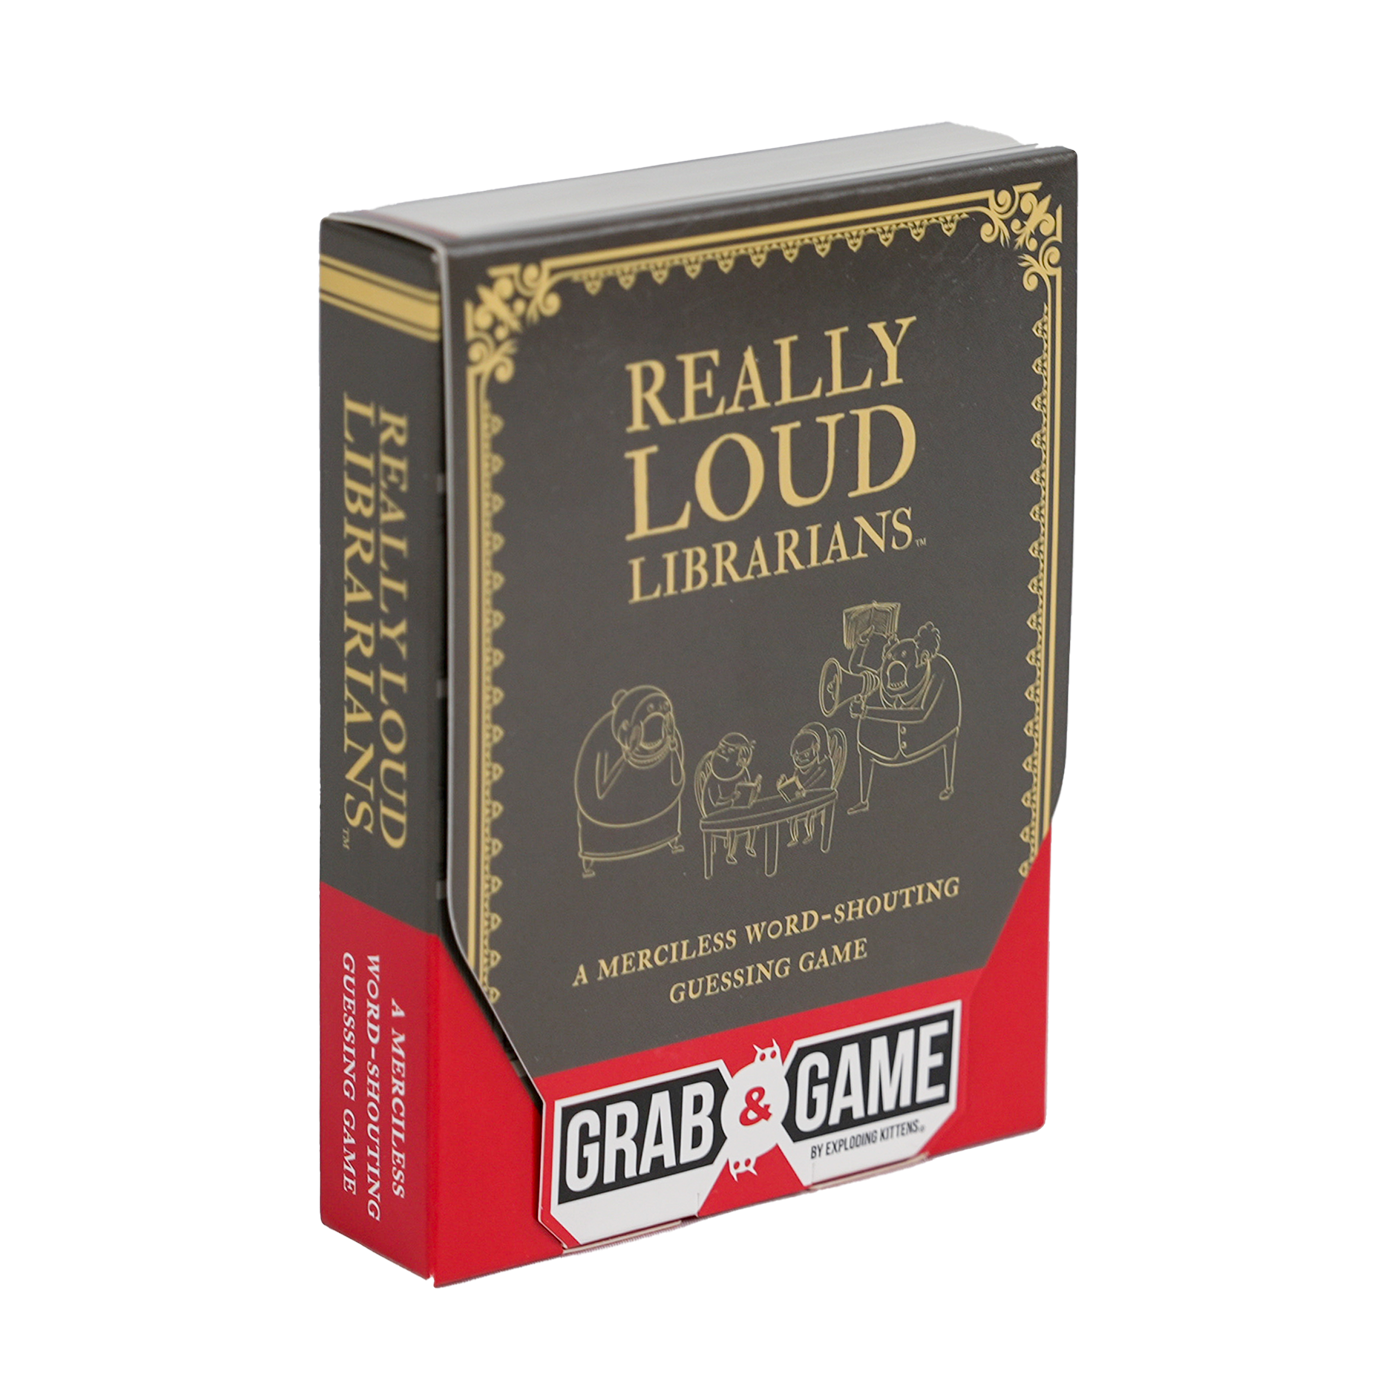 Really Loud Librarians: Grab & Game Edition